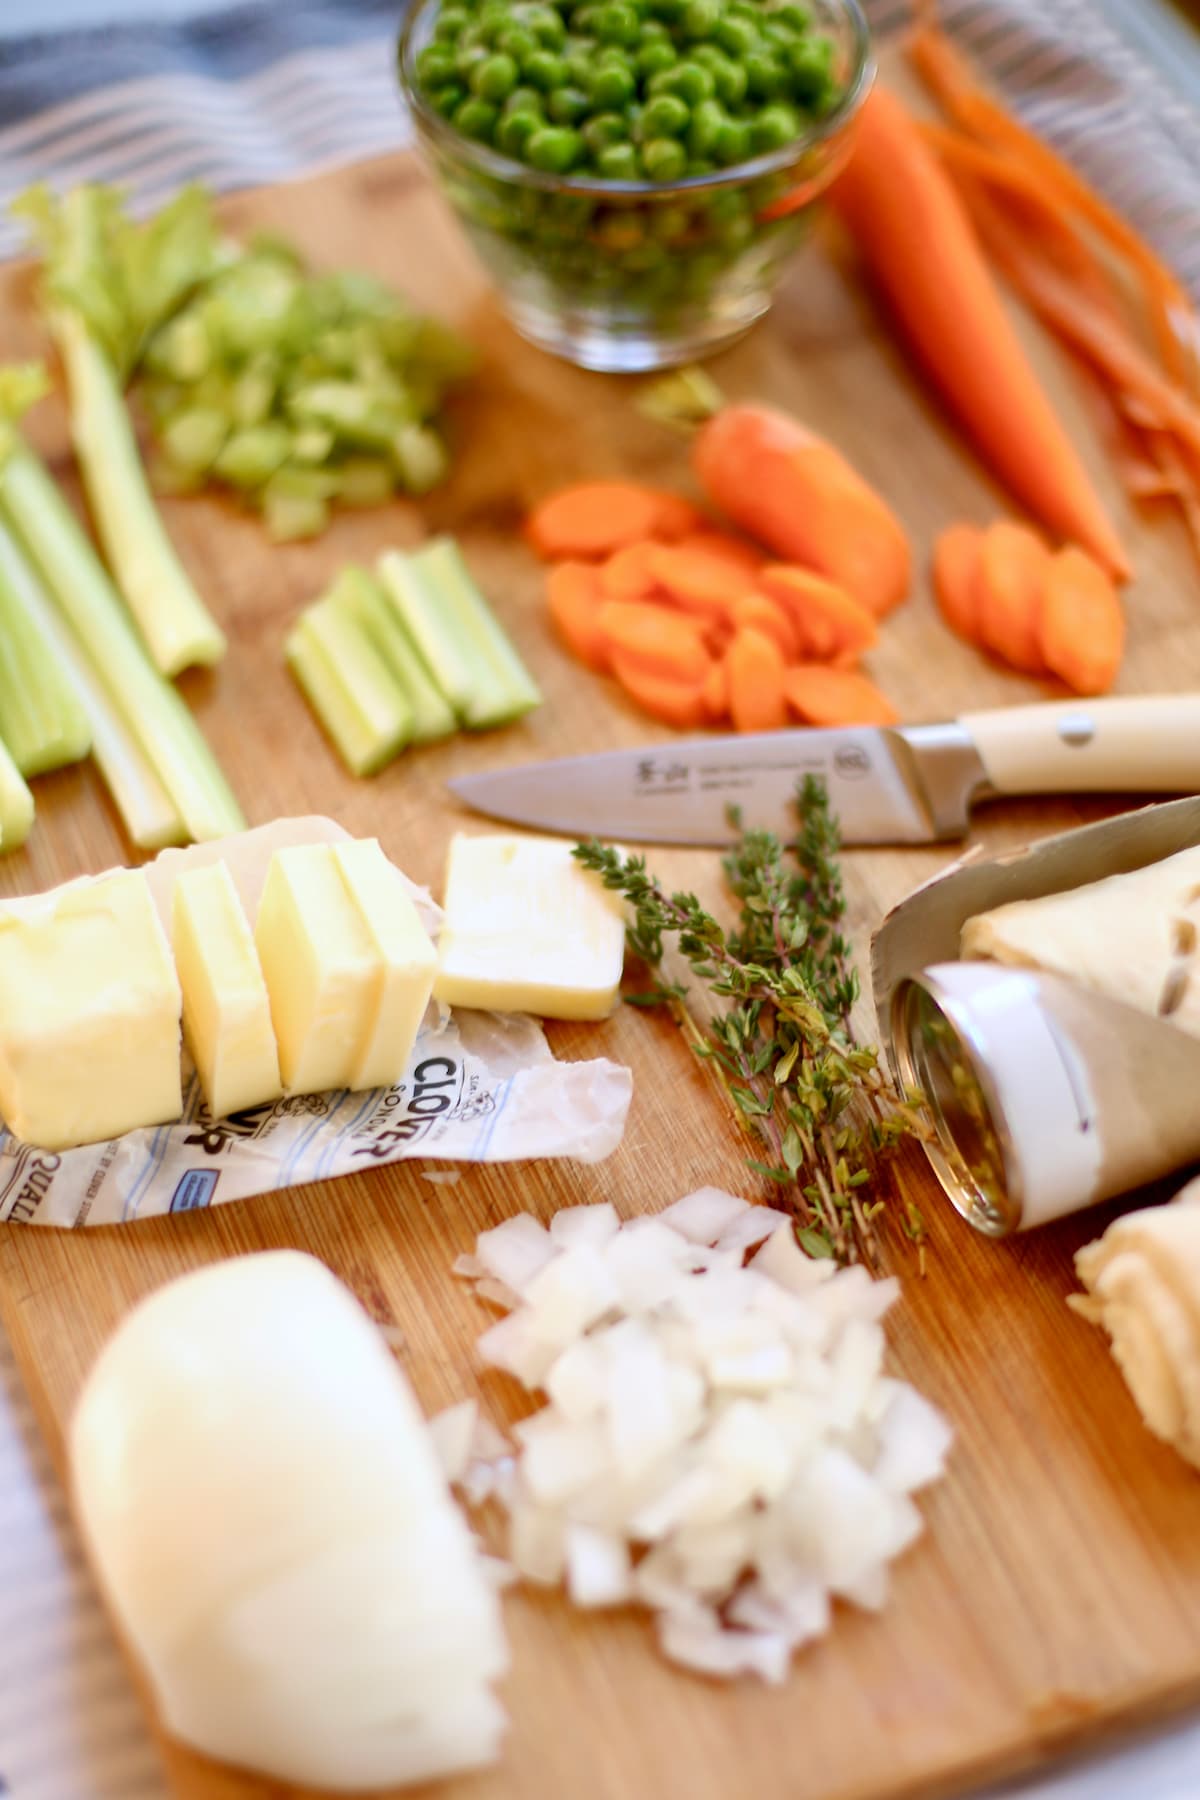 an image of ingredients being prepped for chicken pot pie.